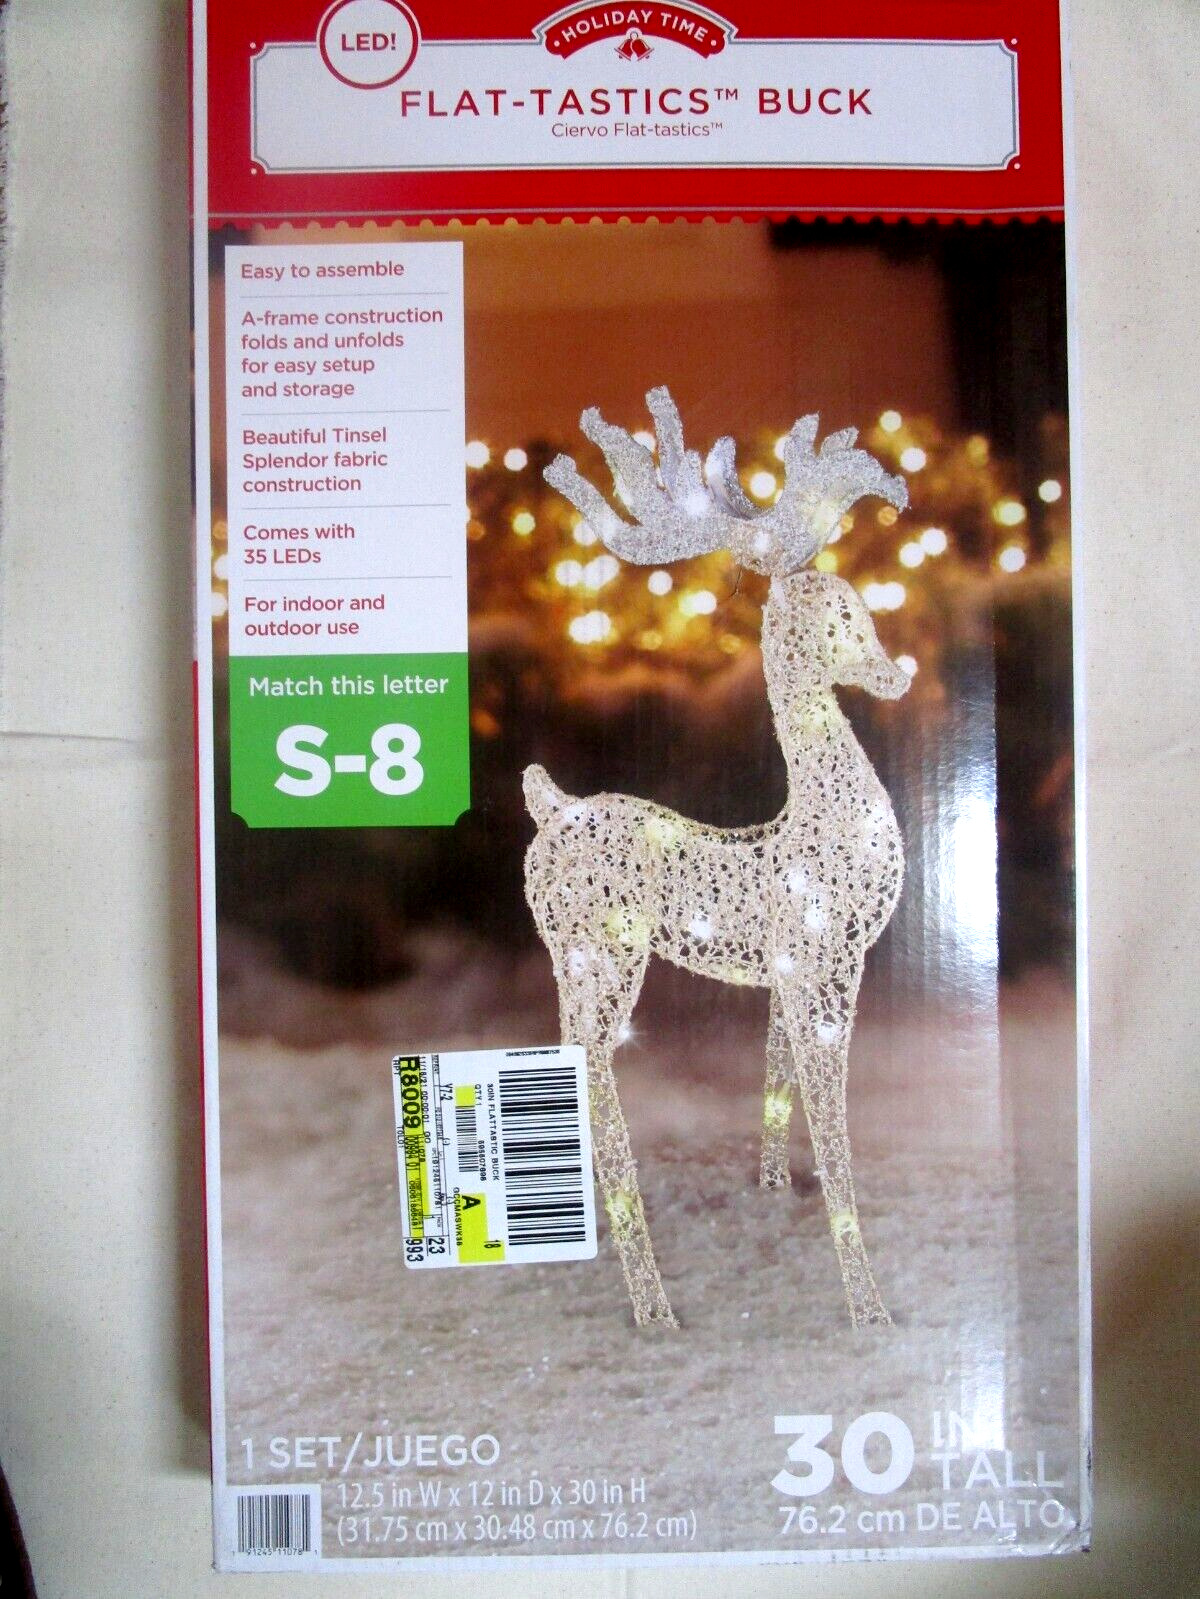 HOLIDAY TIME 30in FLAT-TASTIC BUCK WITH 30 LED LIGHTS YARD DECOR - NEW